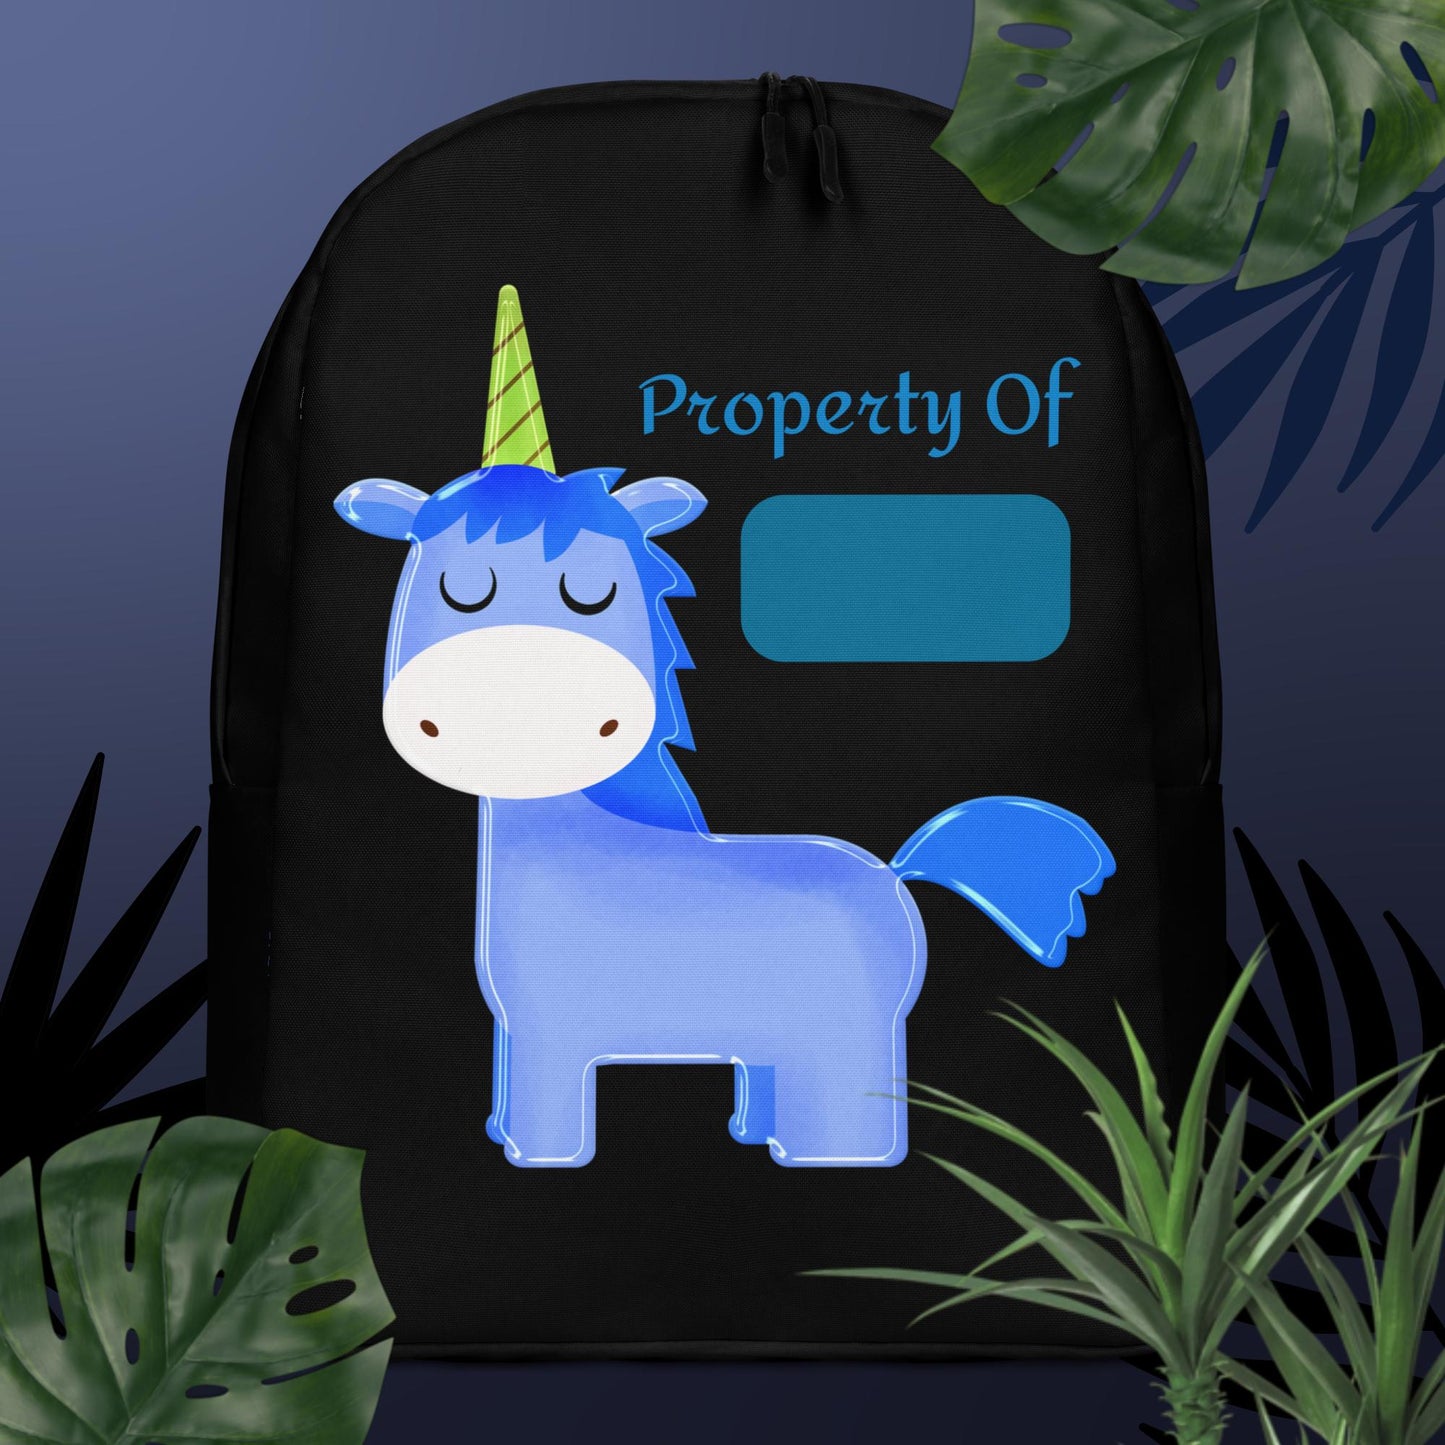 Black Unicorn Backpack with Name Label